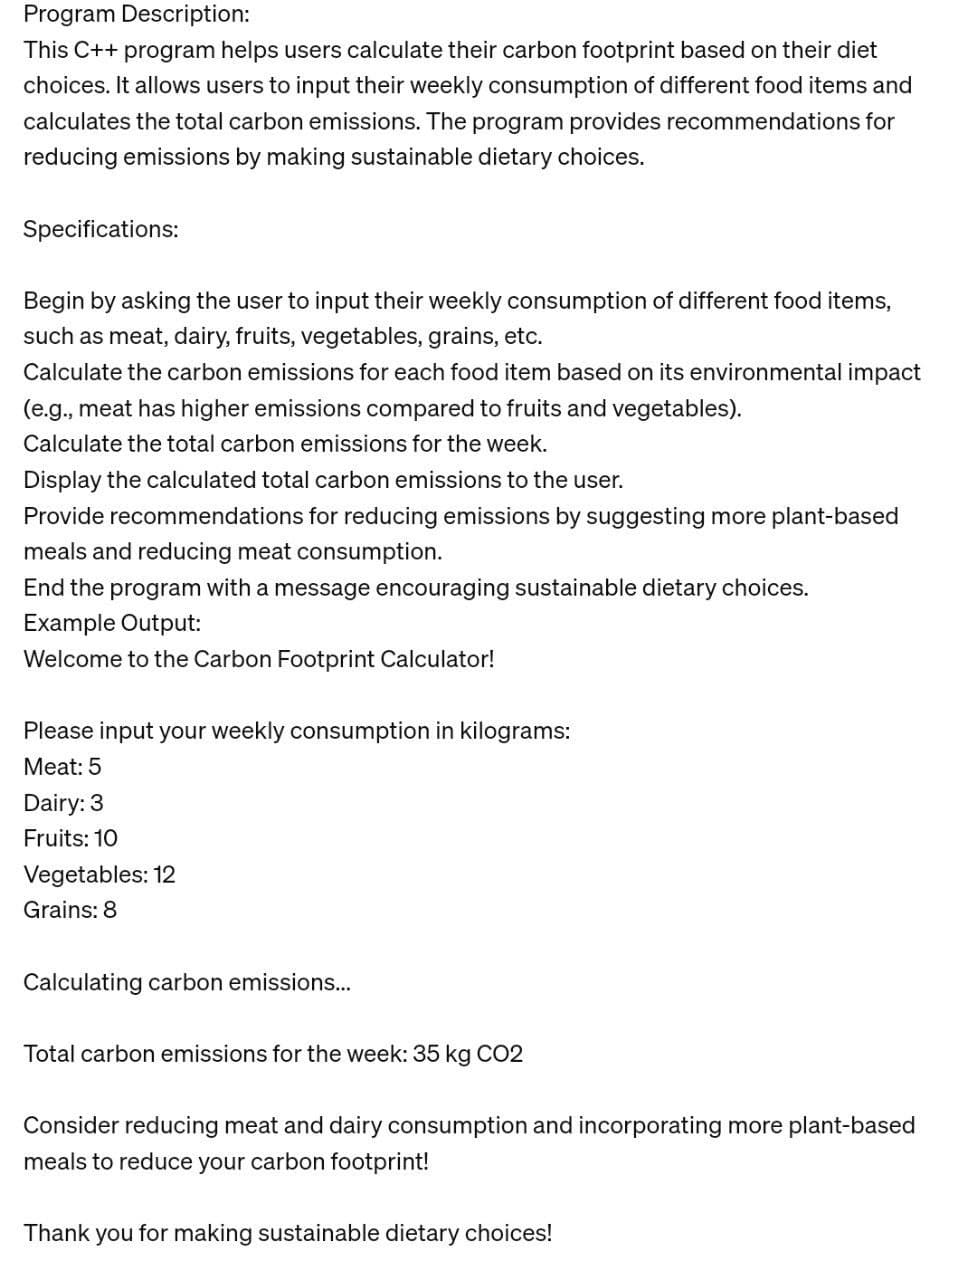 Program Description:
This C++ program helps users calculate their carbon footprint based on their diet
choices. It allows users to input their weekly consumption of different food items and
calculates the total carbon emissions. The program provides recommendations for
reducing emissions by making sustainable dietary choices.
Specifications:
Begin by asking the user to input their weekly consumption of different food items,
such as meat, dairy, fruits, vegetables, grains, etc.
Calculate the carbon emissions for each food item based on its environmental impact
(e.g., meat has higher emissions compared to fruits and vegetables).
Calculate the total carbon emissions for the week.
Display the calculated total carbon emissions to the user.
Provide recommendations for reducing emissions by suggesting more plant-based
meals and reducing meat consumption.
End the program with a message encouraging sustainable dietary choices.
Example Output:
Welcome to the Carbon Footprint Calculator!
Please input your weekly consumption in kilograms:
Meat: 5
Dairy: 3
Fruits: 10
Vegetables: 12
Grains: 8
Calculating carbon emissions...
Total carbon emissions for the week: 35 kg CO2
Consider reducing meat and dairy consumption and incorporating more plant-based
meals to reduce your carbon footprint!
Thank you for making sustainable dietary choices!